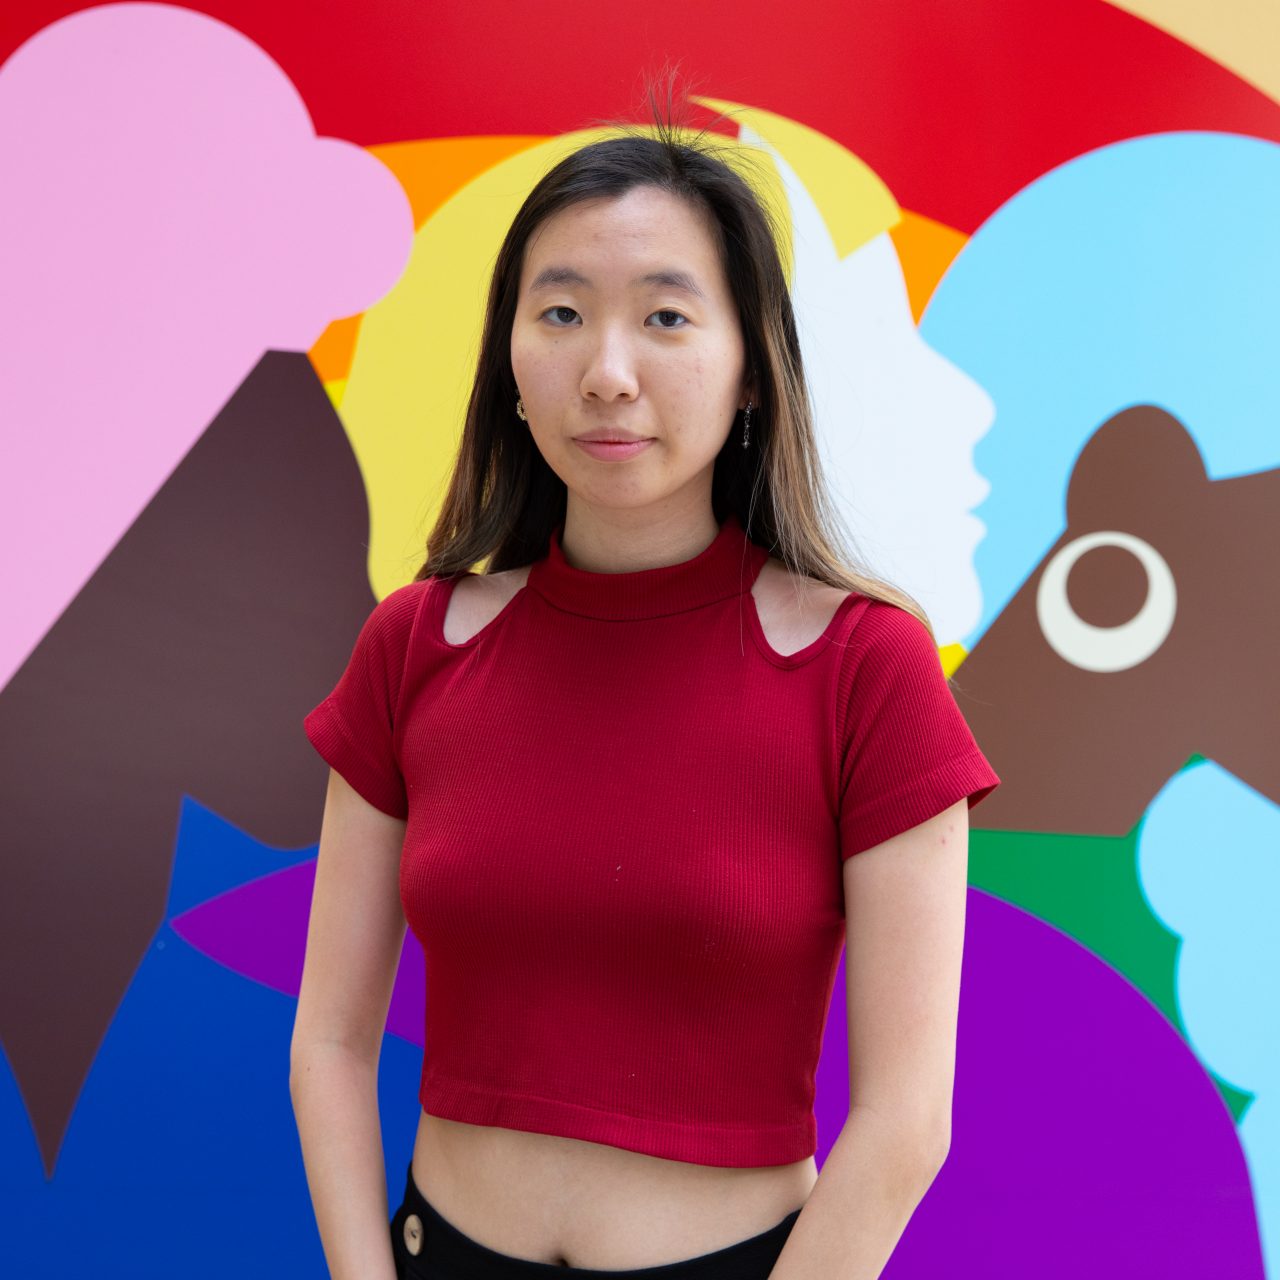 Winnie stands in front of a colourful mural